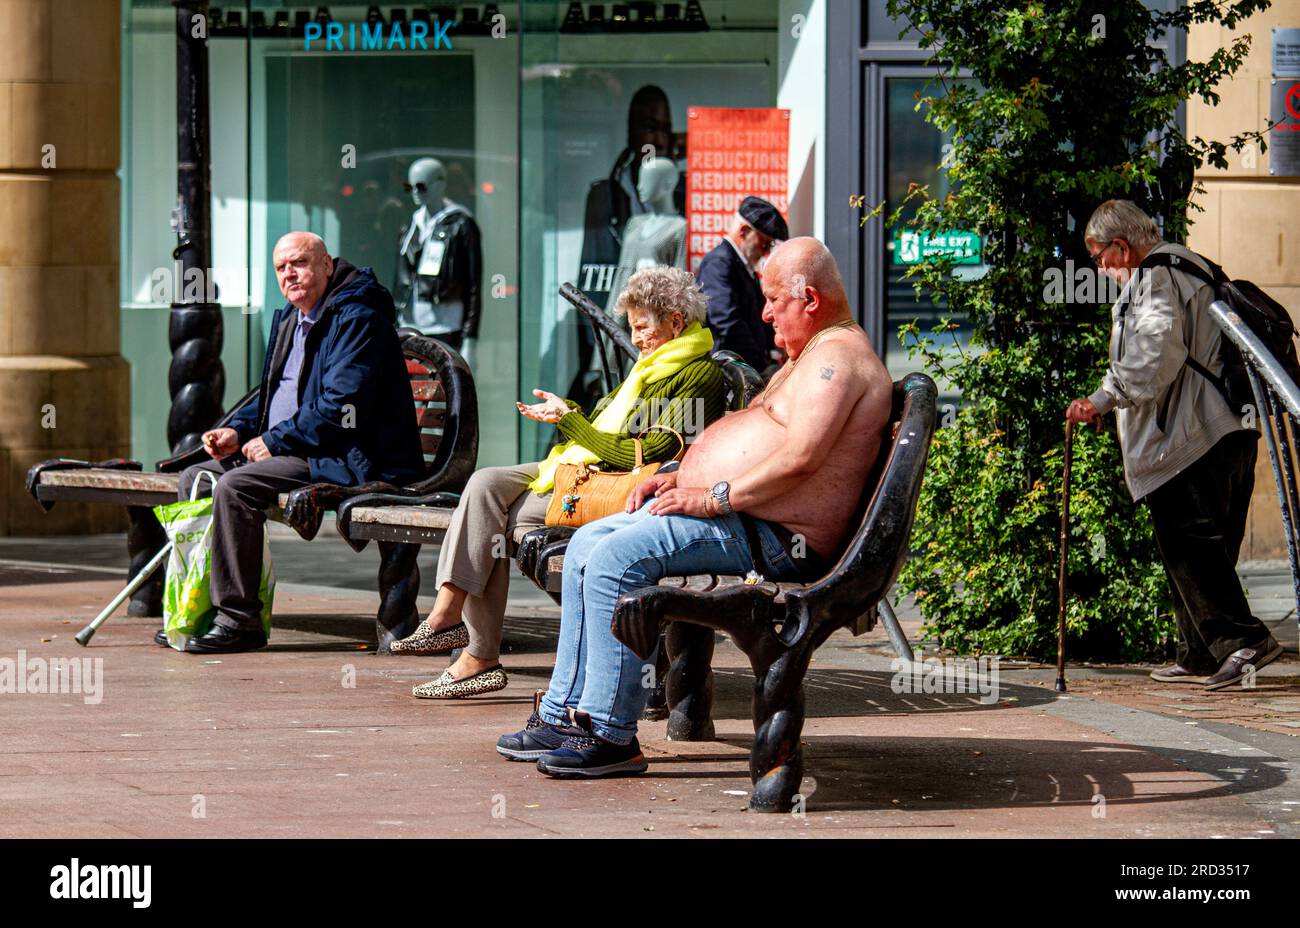 Dundee, Tayside, Scotland, UK. 18th July, 2023. UK Weather: Today's summer day temperature in Tayside, Scotland, reached 22°C. Stylish local residents spend the day in Dundee's city centre, taking advantage of the lovely warm July morning sunshine as well as enjoying town life. Credit: Dundee Photographics/Alamy Live News Stock Photo